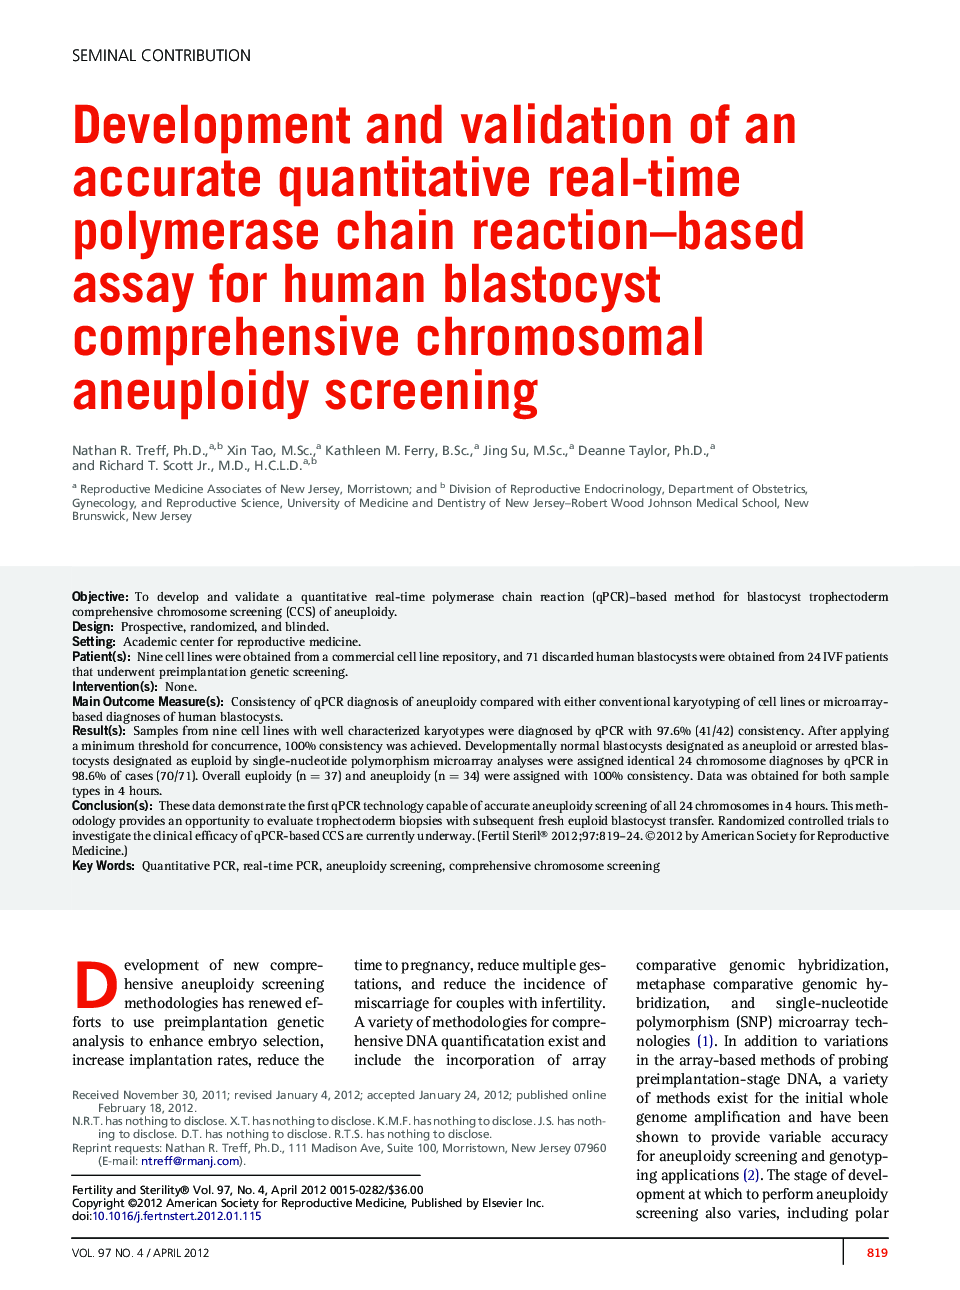 Development and validation of an accurate quantitative real-time polymerase chain reaction-based assay for human blastocyst comprehensive chromosomal aneuploidy screening